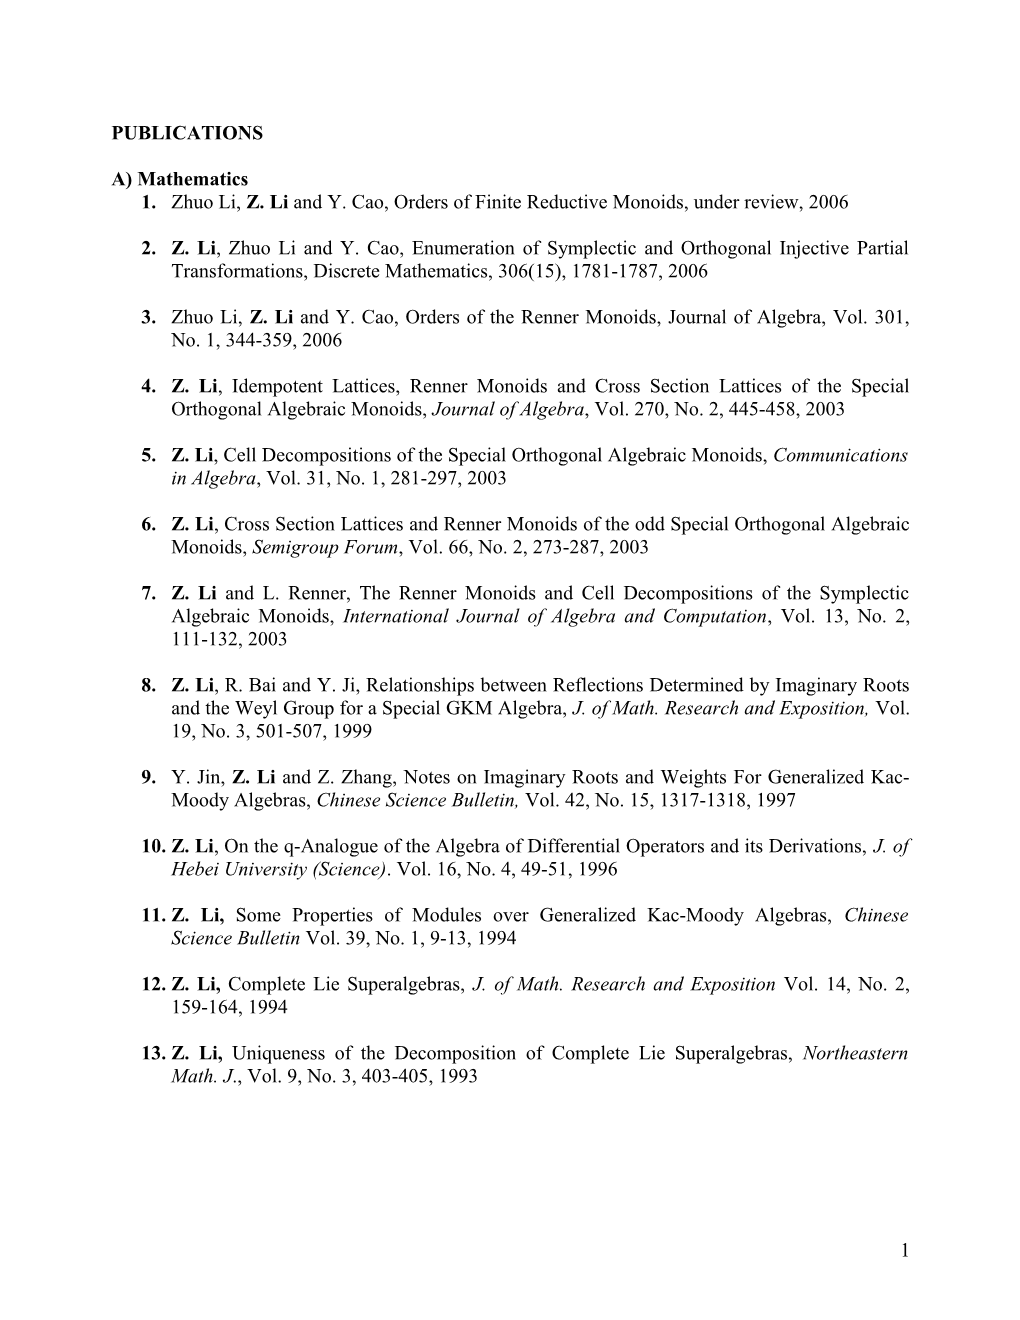 1. Zhuo Li, Z. Li and Y. Cao, Orders of Finite Reductive Monoids, Under Review, 2006